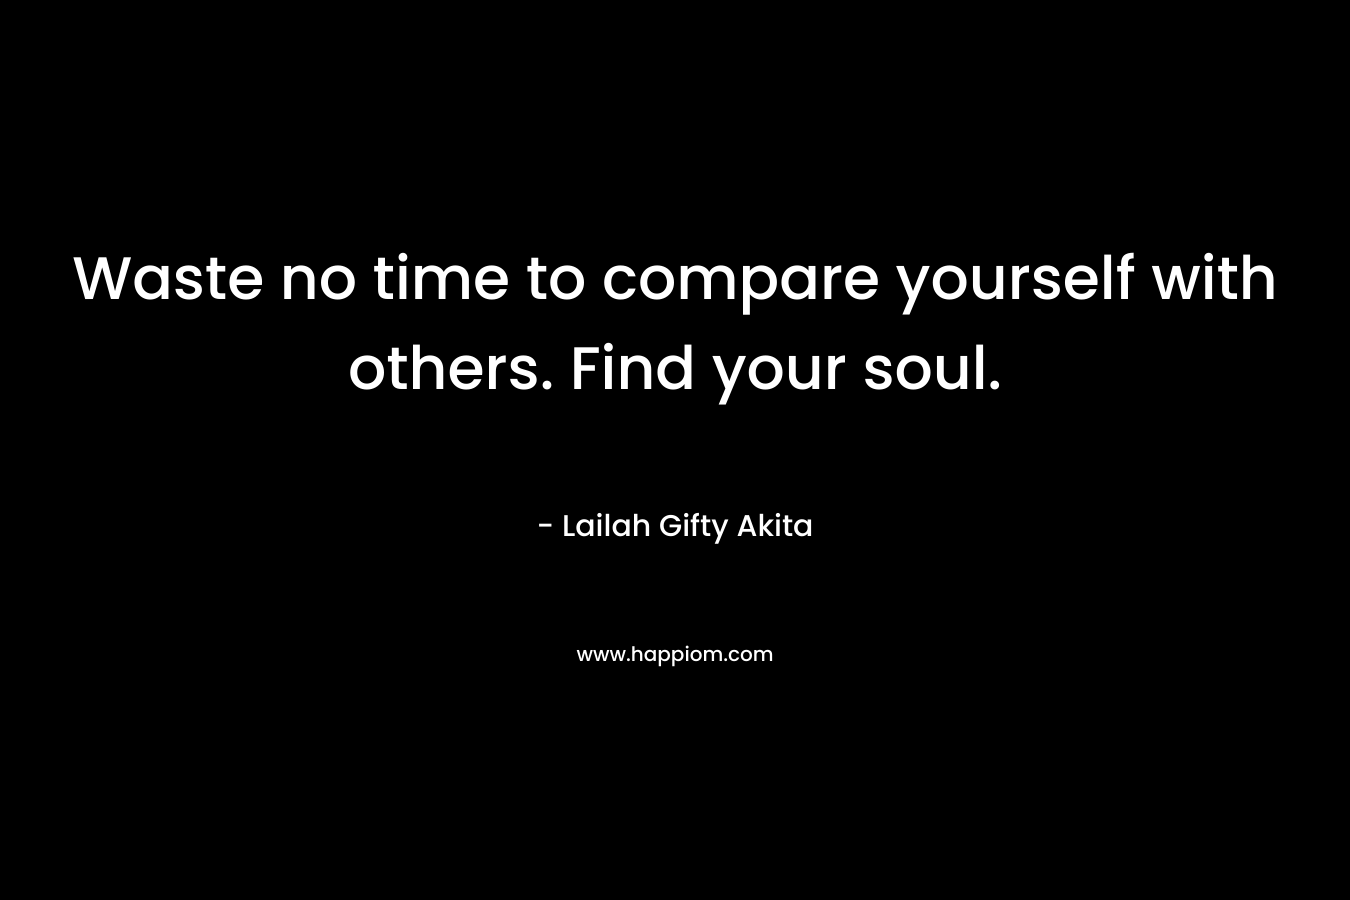 Waste no time to compare yourself with others. Find your soul.